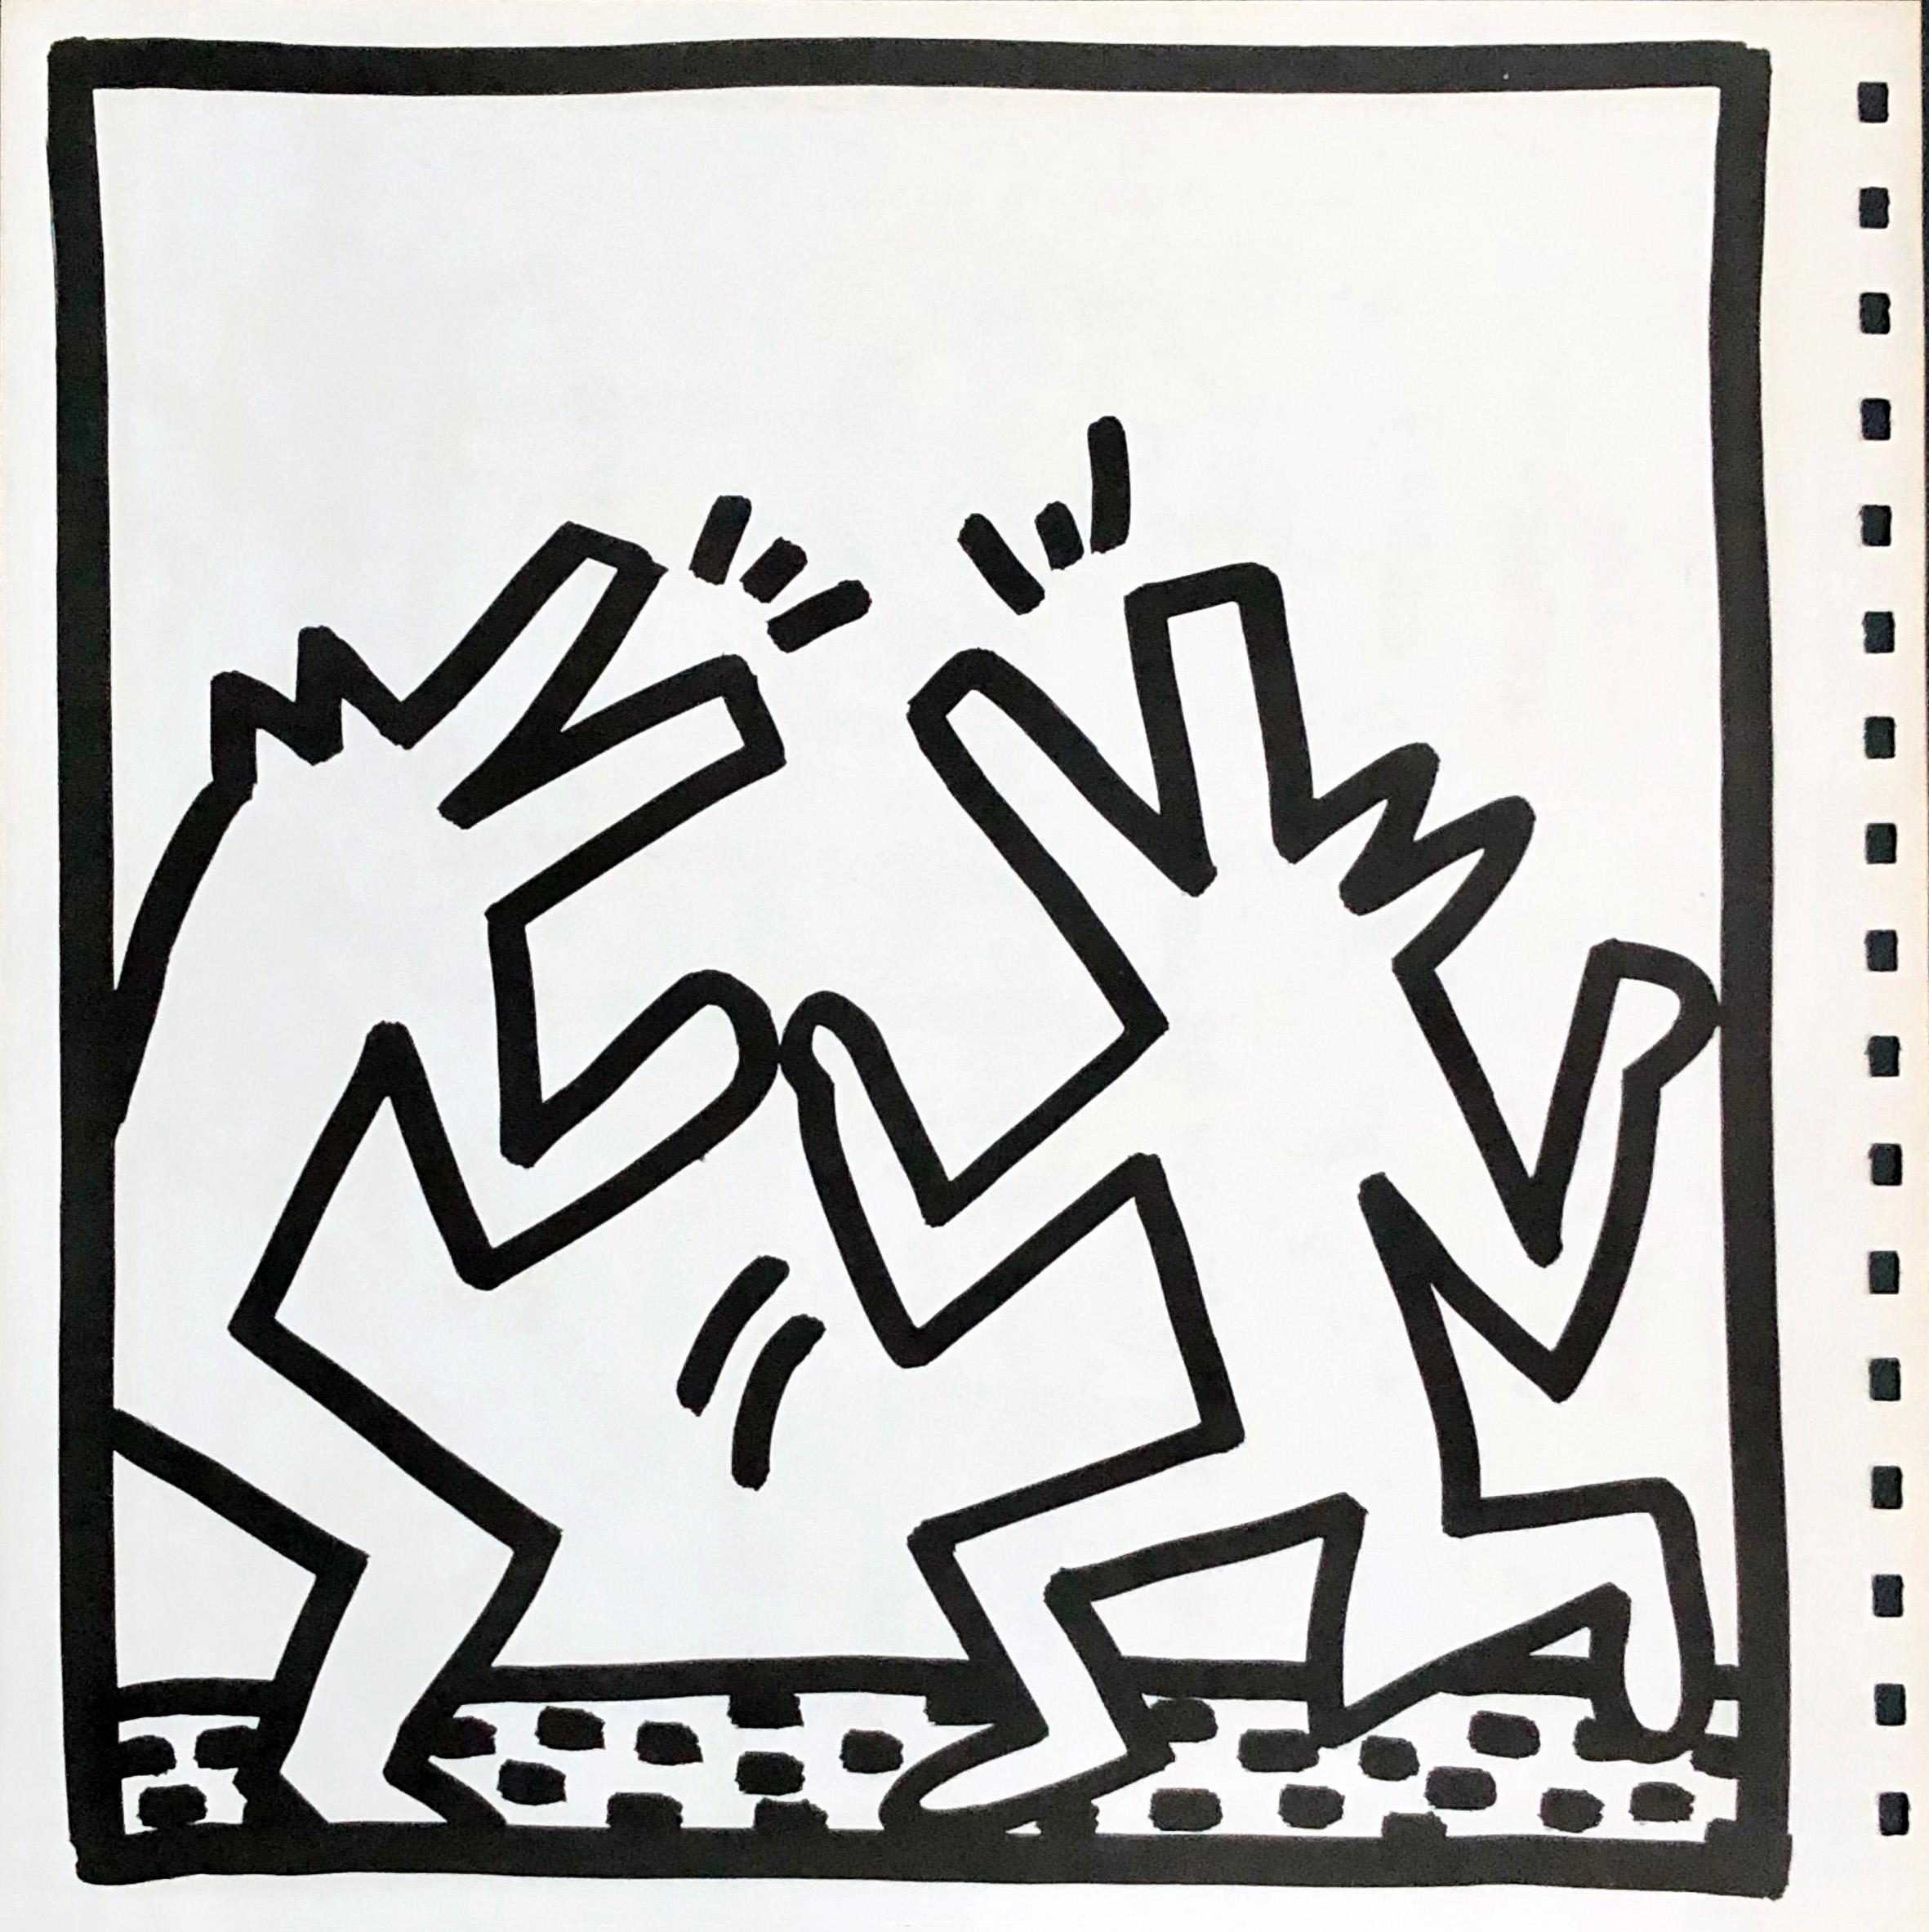 Keith Haring (untitled) Crocodiles lithograph 1982 (Keith Haring prints)  - Print by (after) Keith Haring